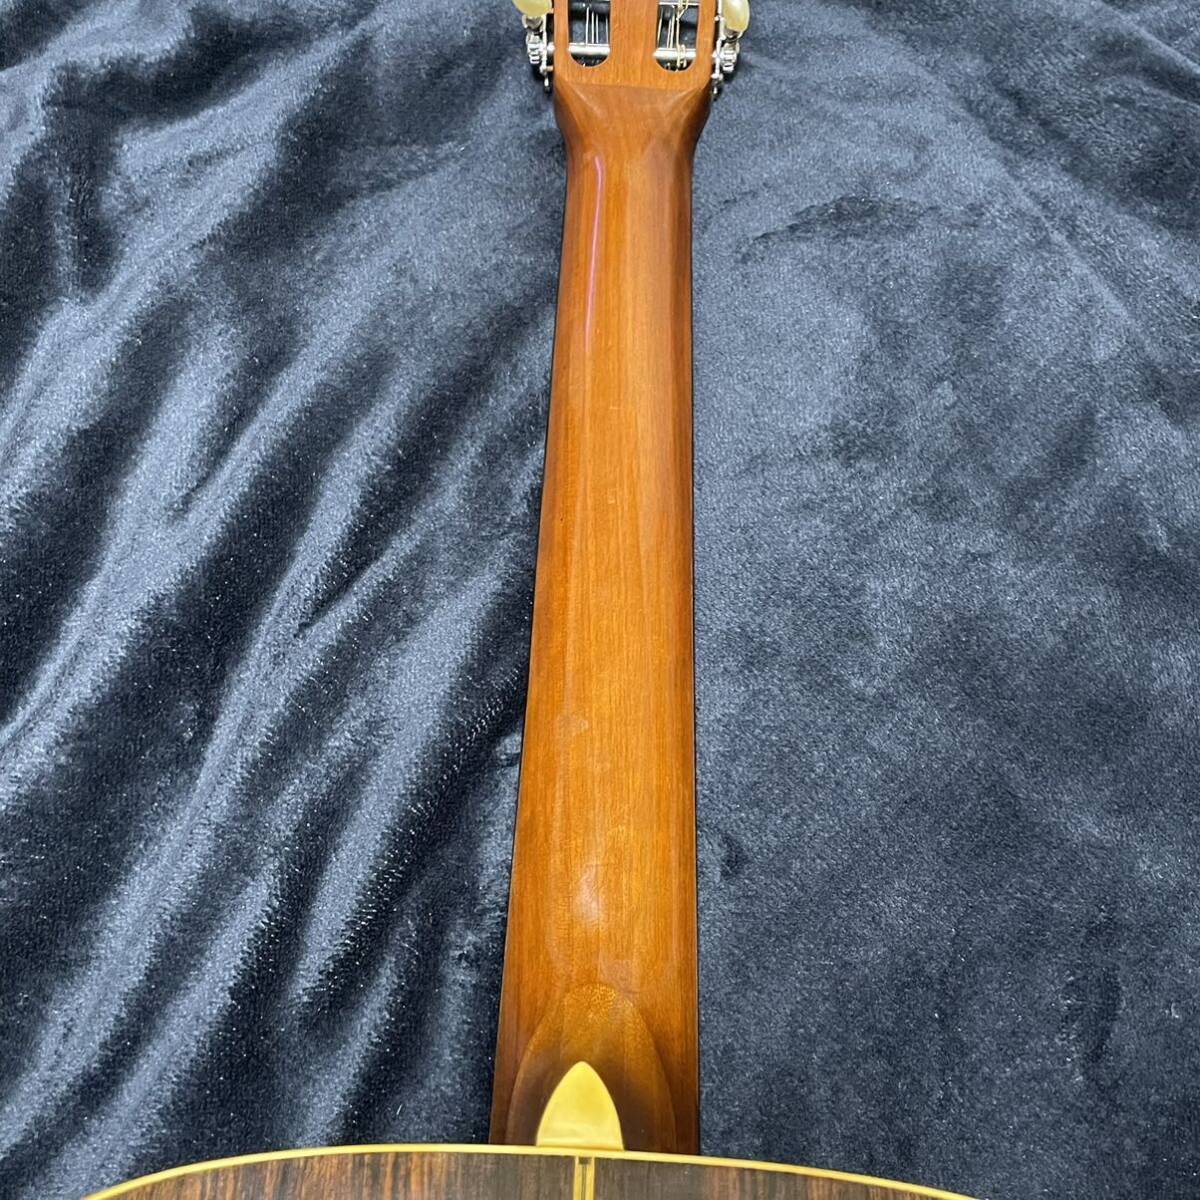  rice field . musical instruments Jumbo J-12-40 12 string acoustic guitar 